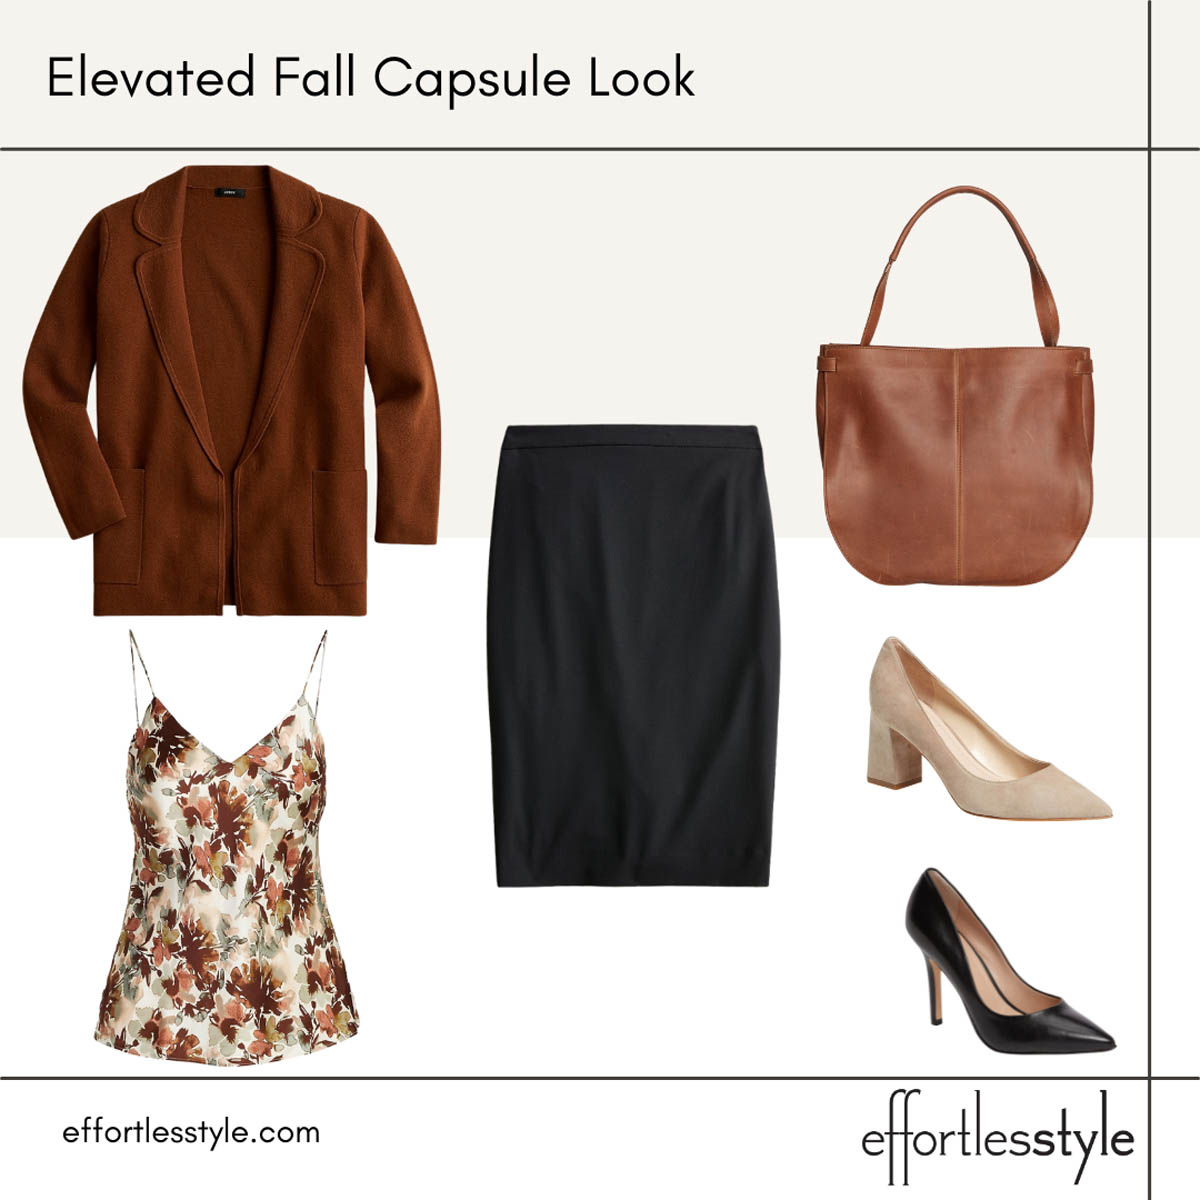 Fall Rust Coatigan and Pencil Skirt Look What to Wear to the Office